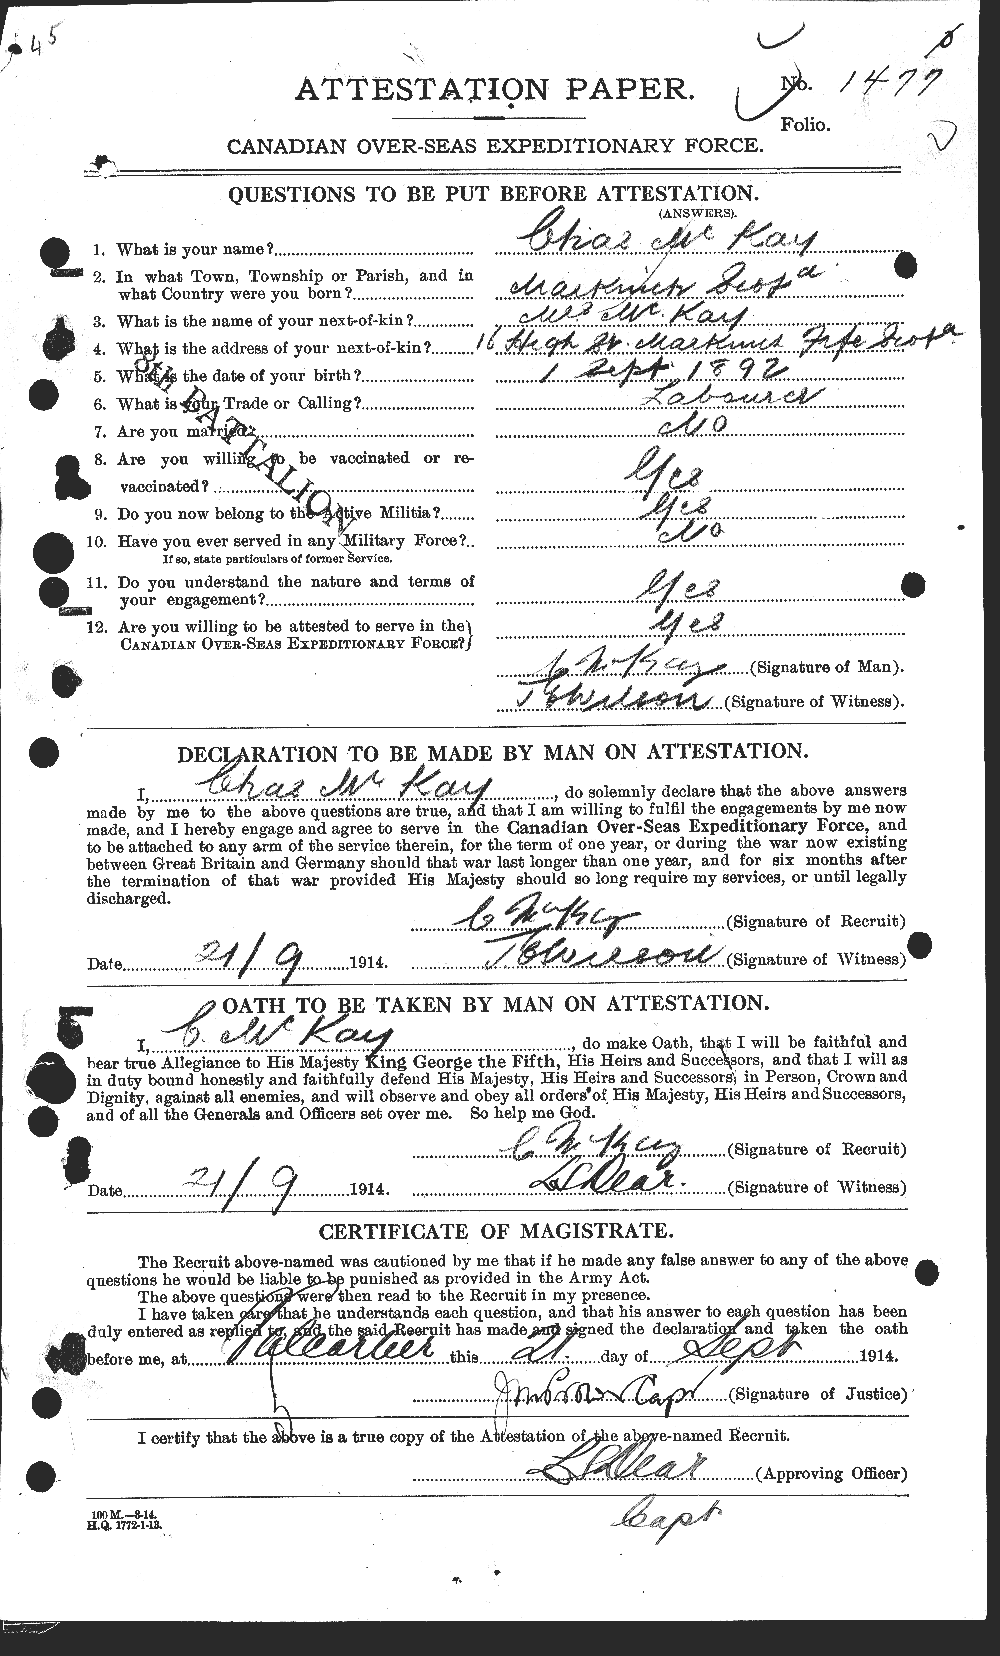 Personnel Records of the First World War - CEF 531059a